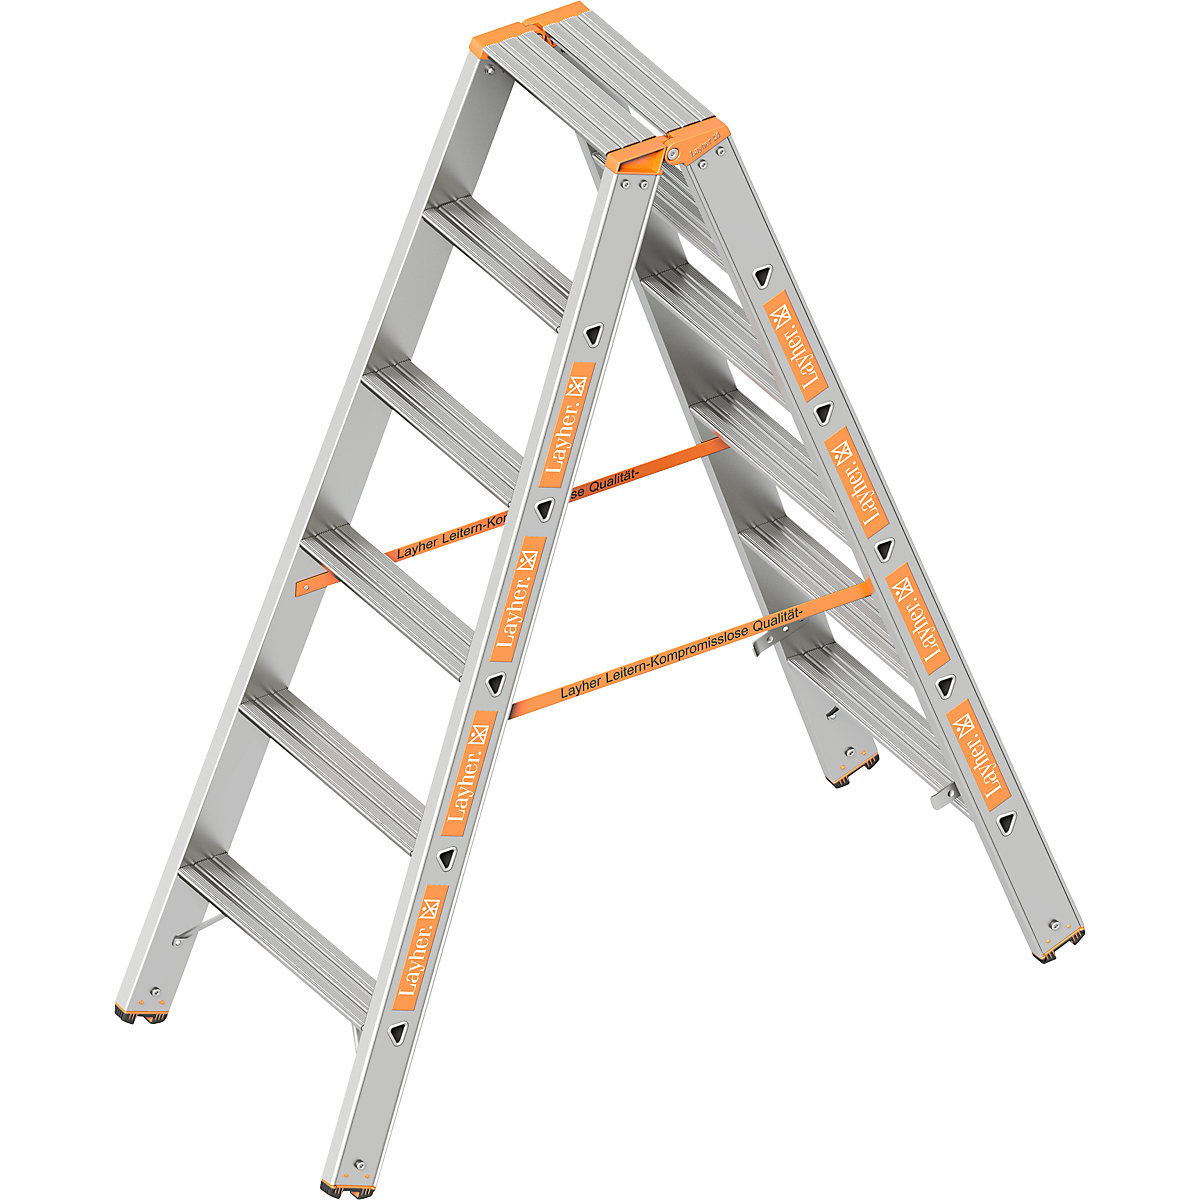 Step ladder – Layher, double sided access, 2 x 6 steps-6